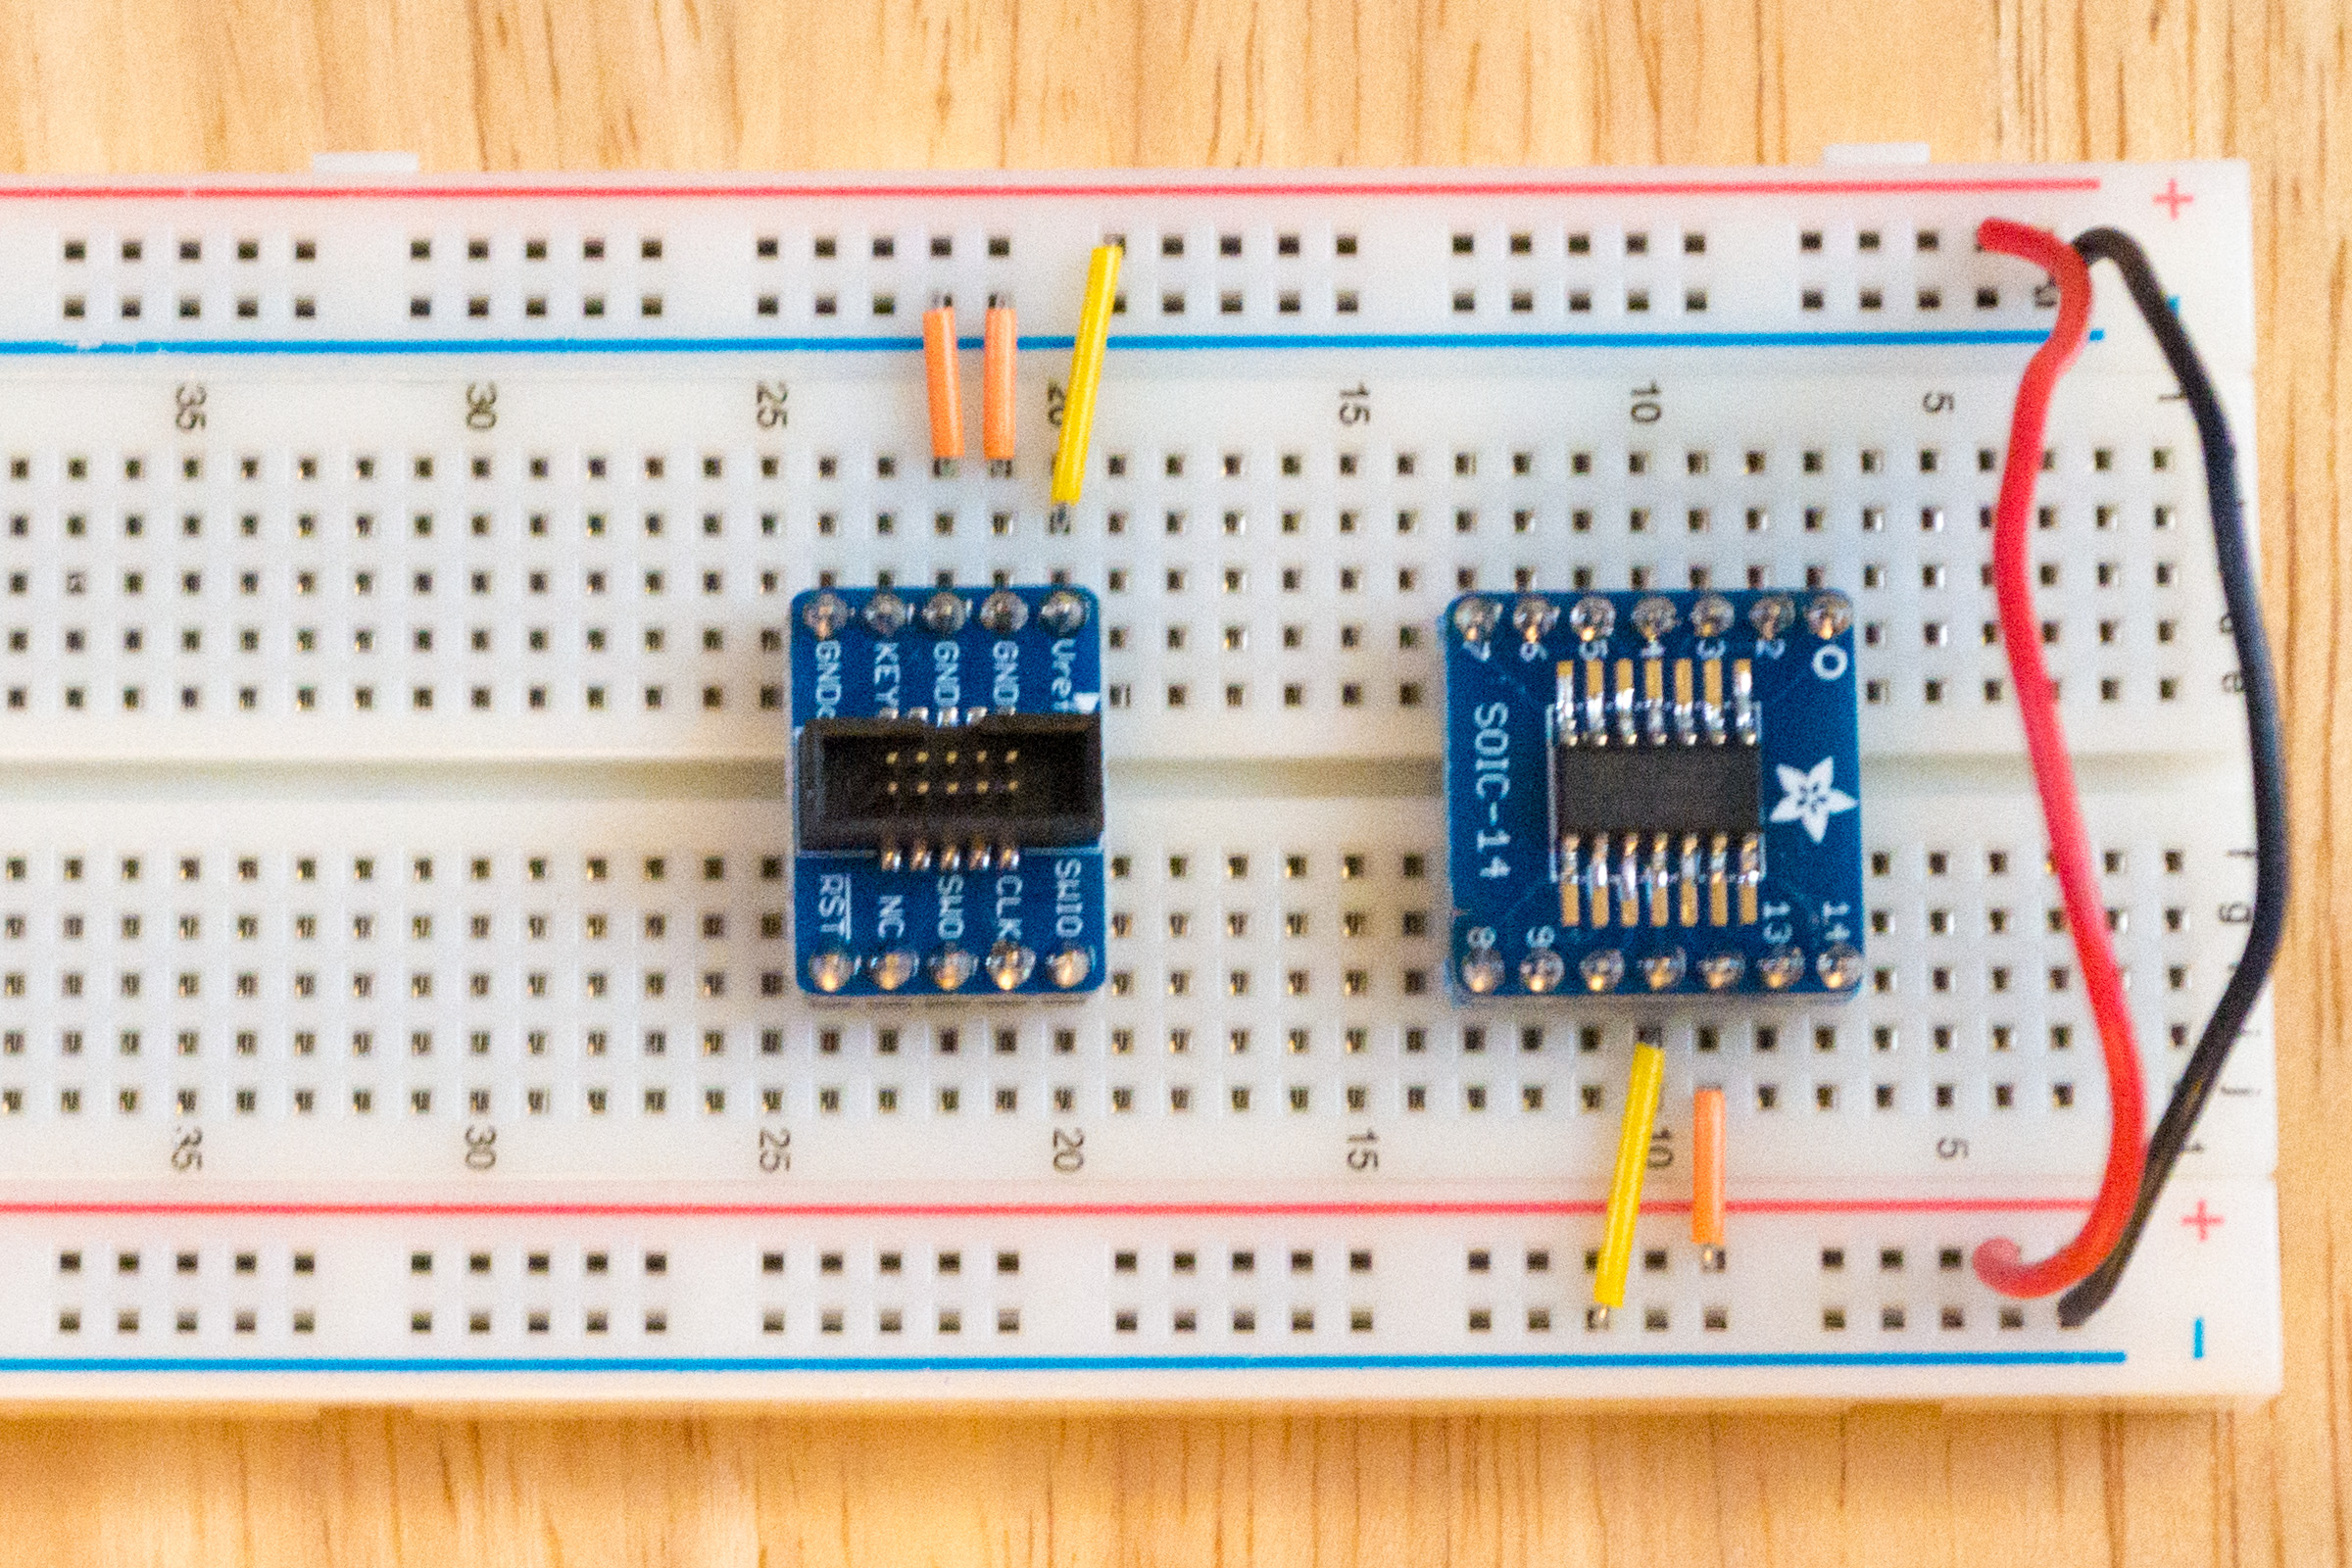 Breadboard with power and ground wires connected.